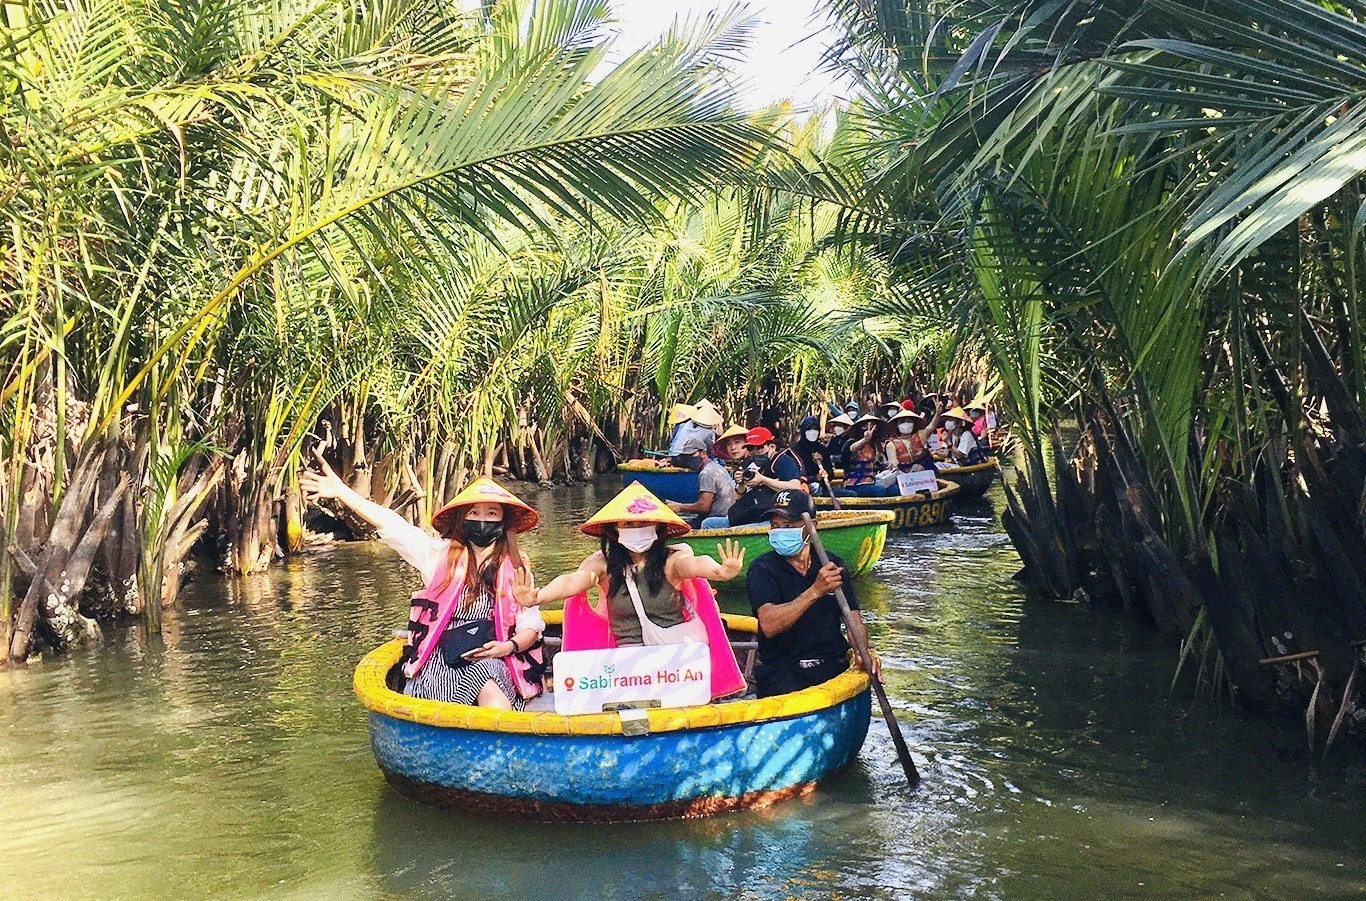 South Korean famtrip delegation in Bay Mau nipa palm forest (Hoi An city, Quang Nam province)